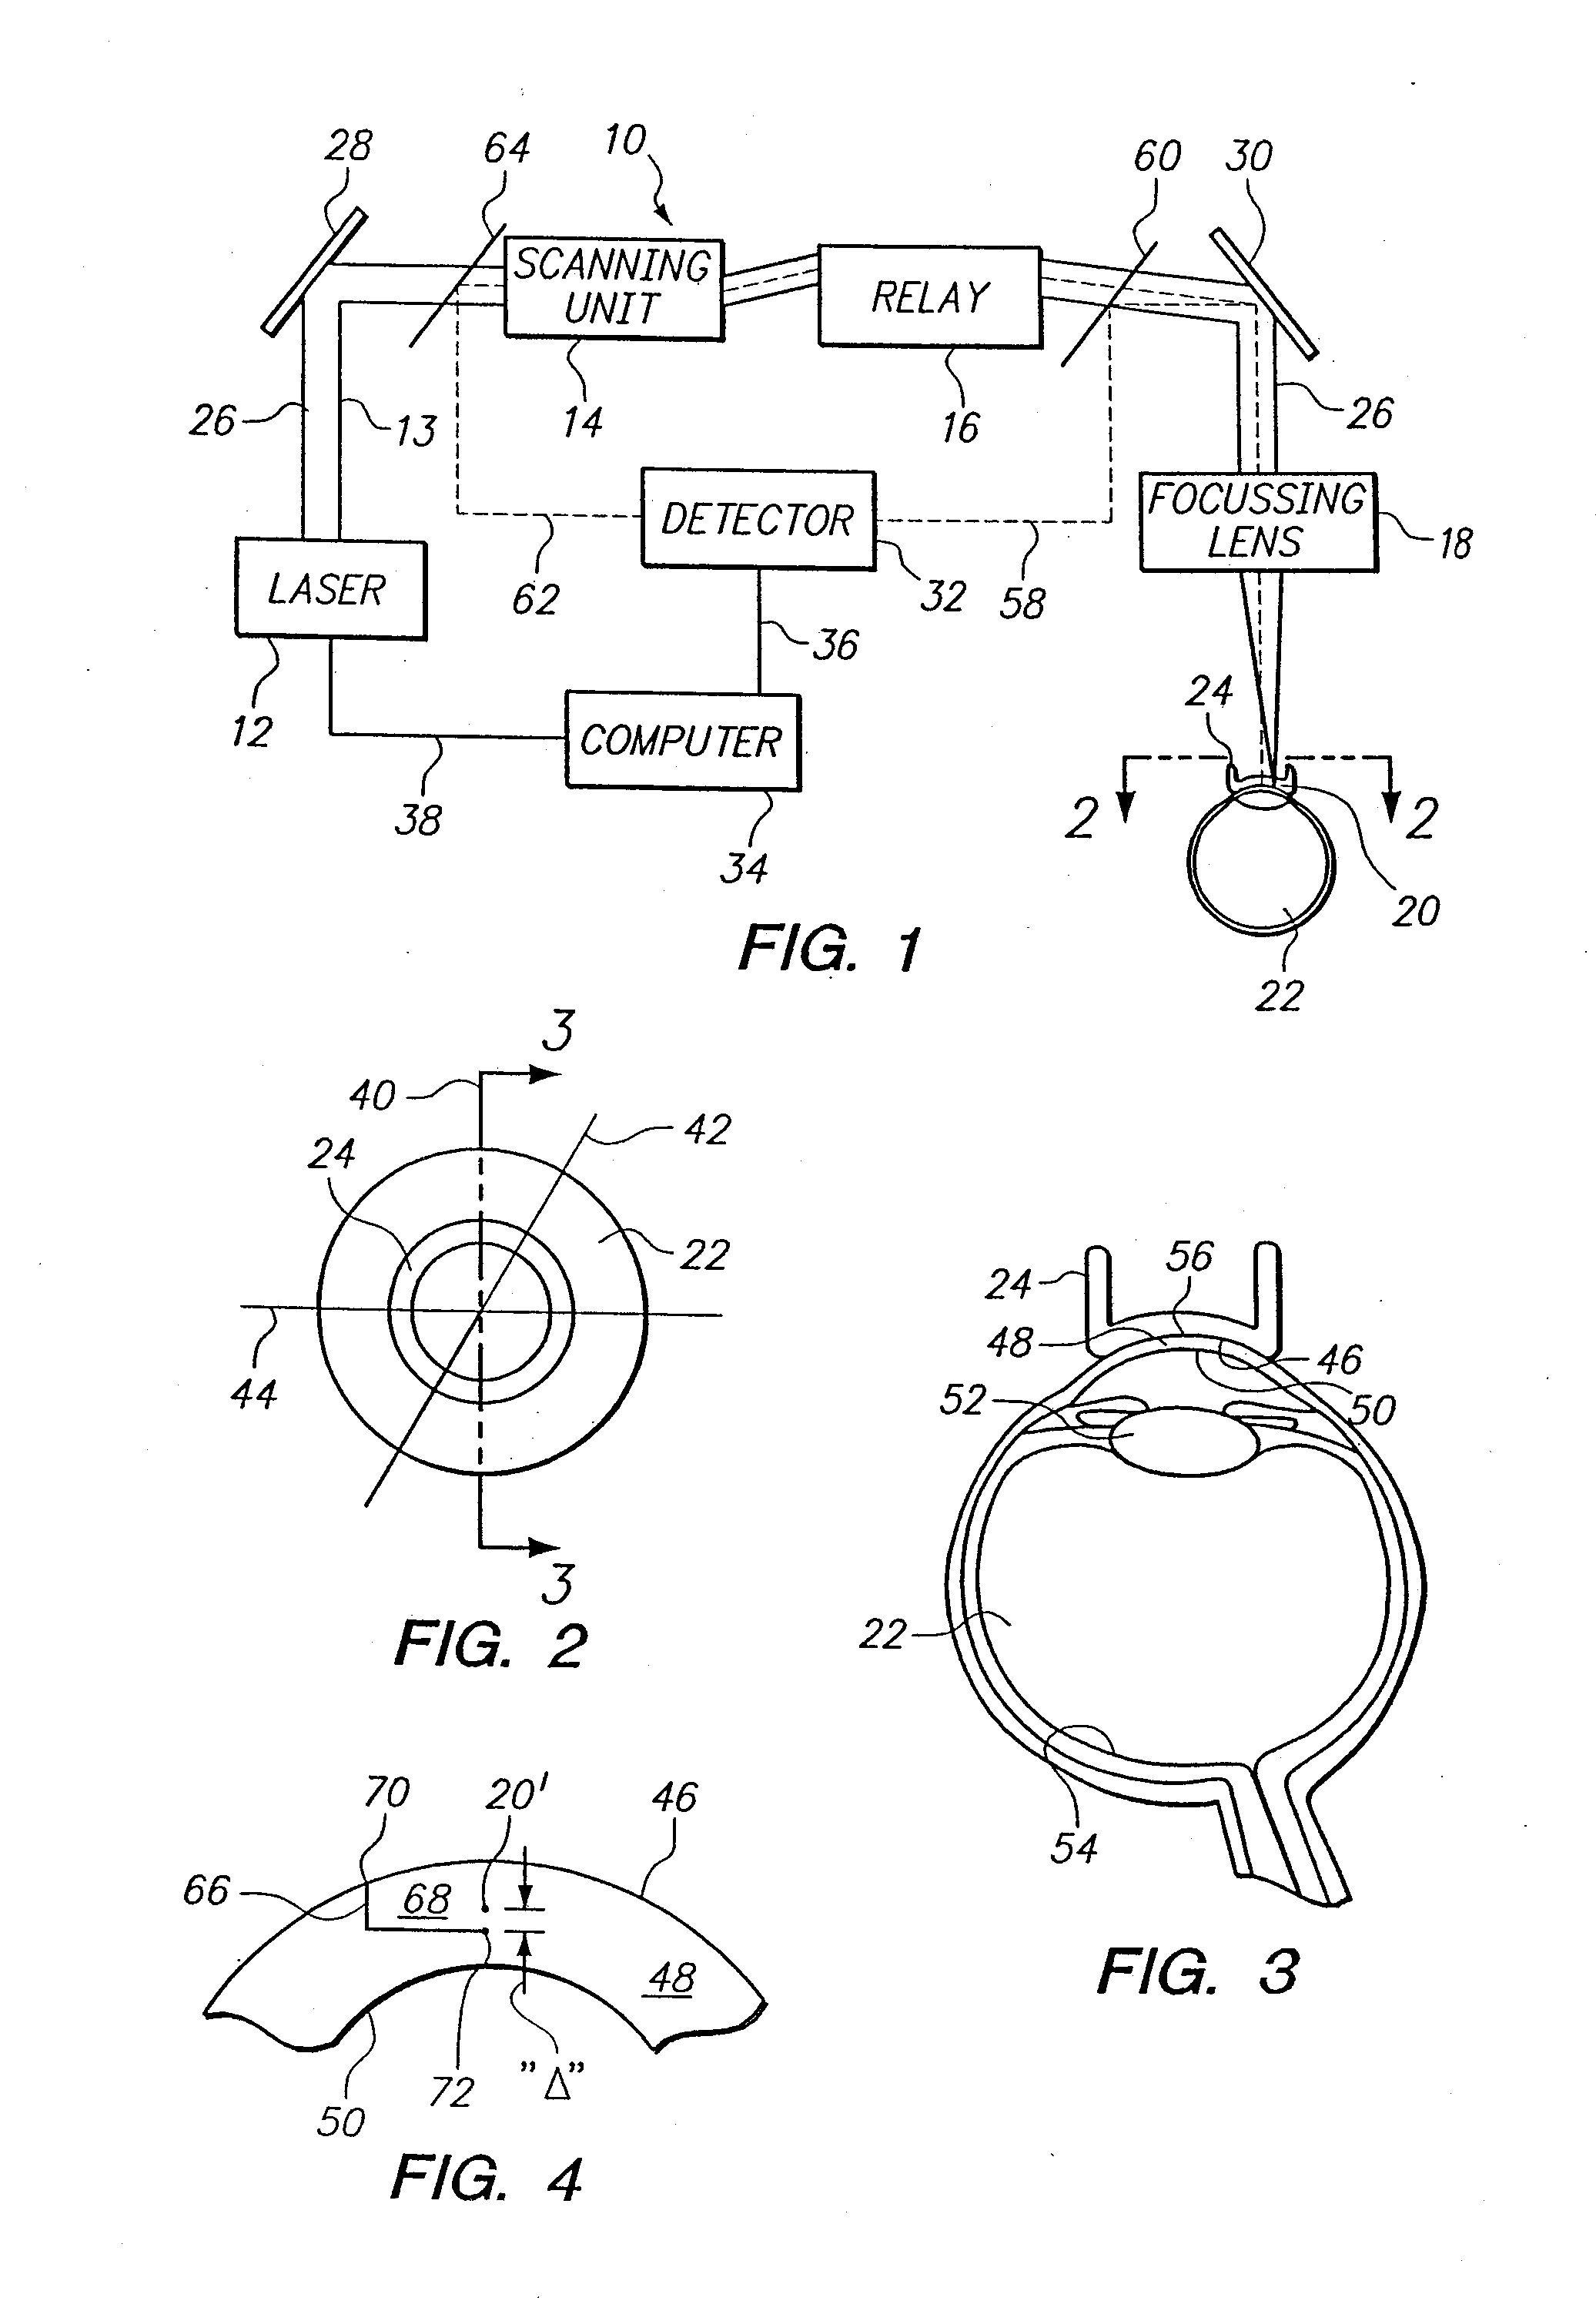 Apparatus and Method for Morphing a Three-Dimensional Target Surface into a Two-Dimensional Image for Use in Guiding a Laser Beam in Ocular Surgery